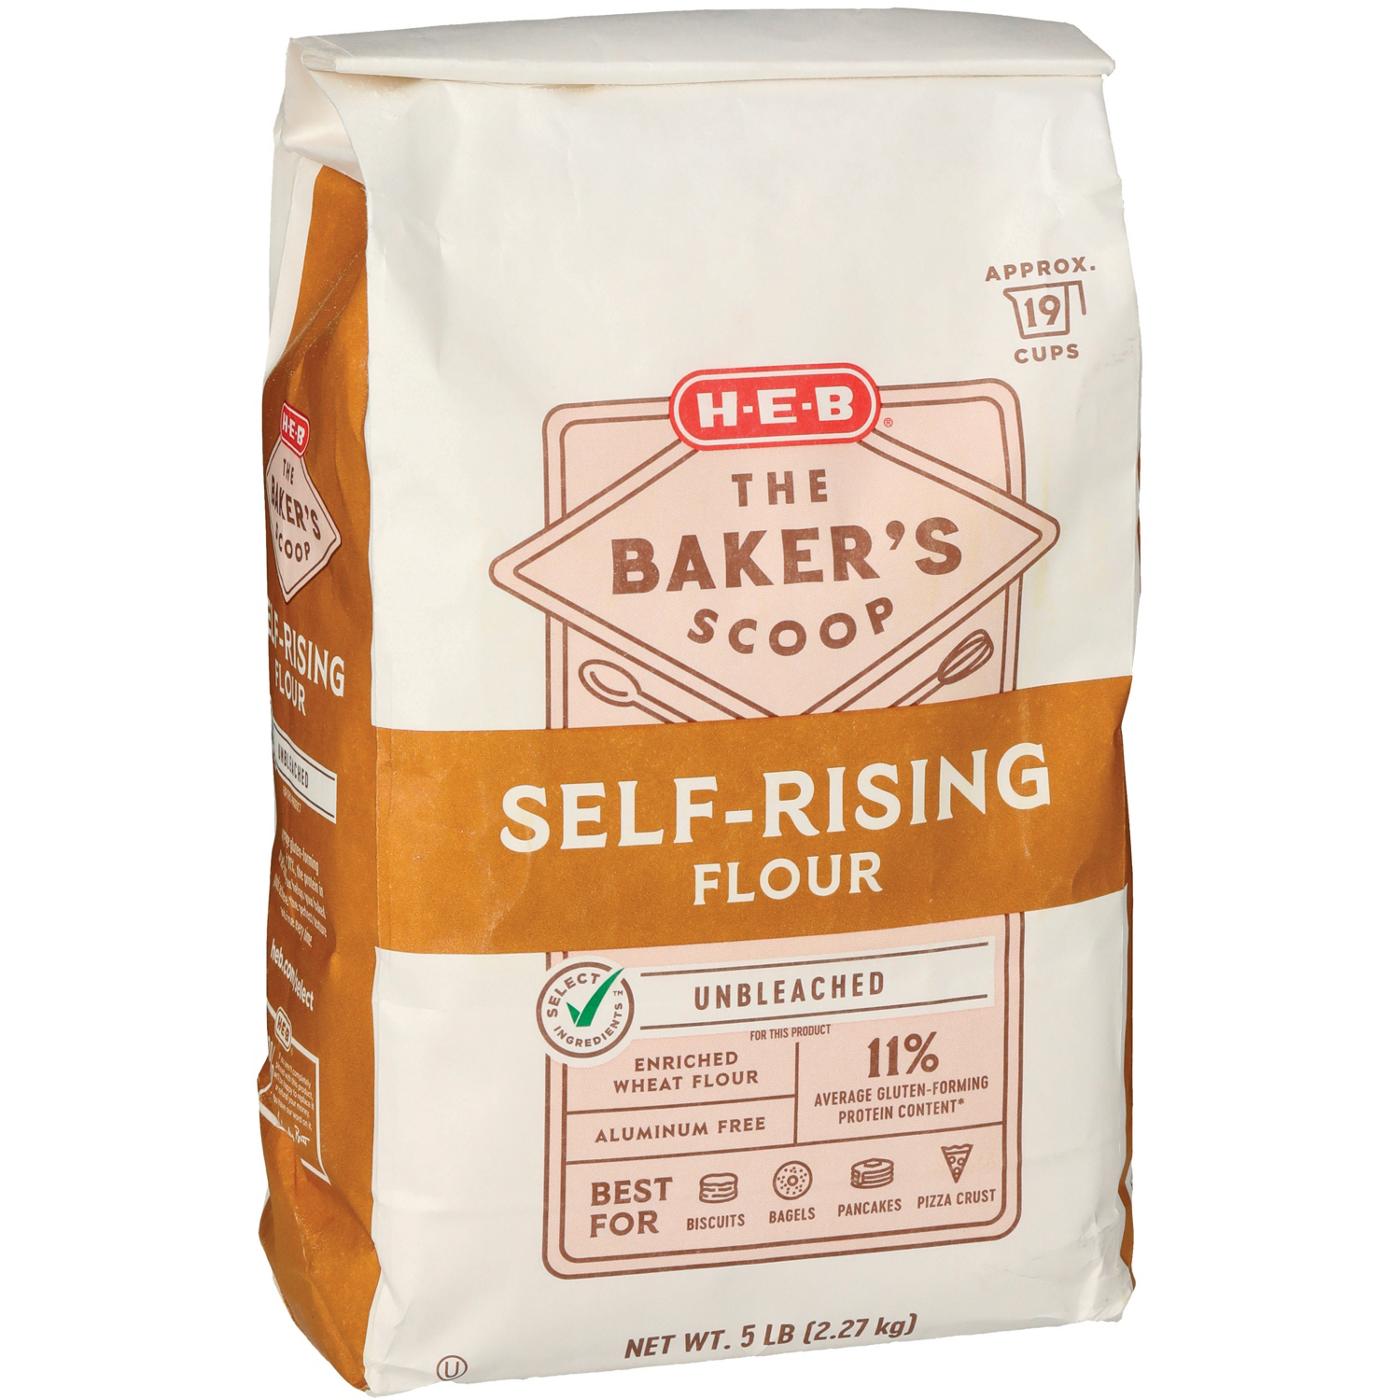 H-E-B The Baker's Scoop Unbleached Self-Rising Flour; image 2 of 2